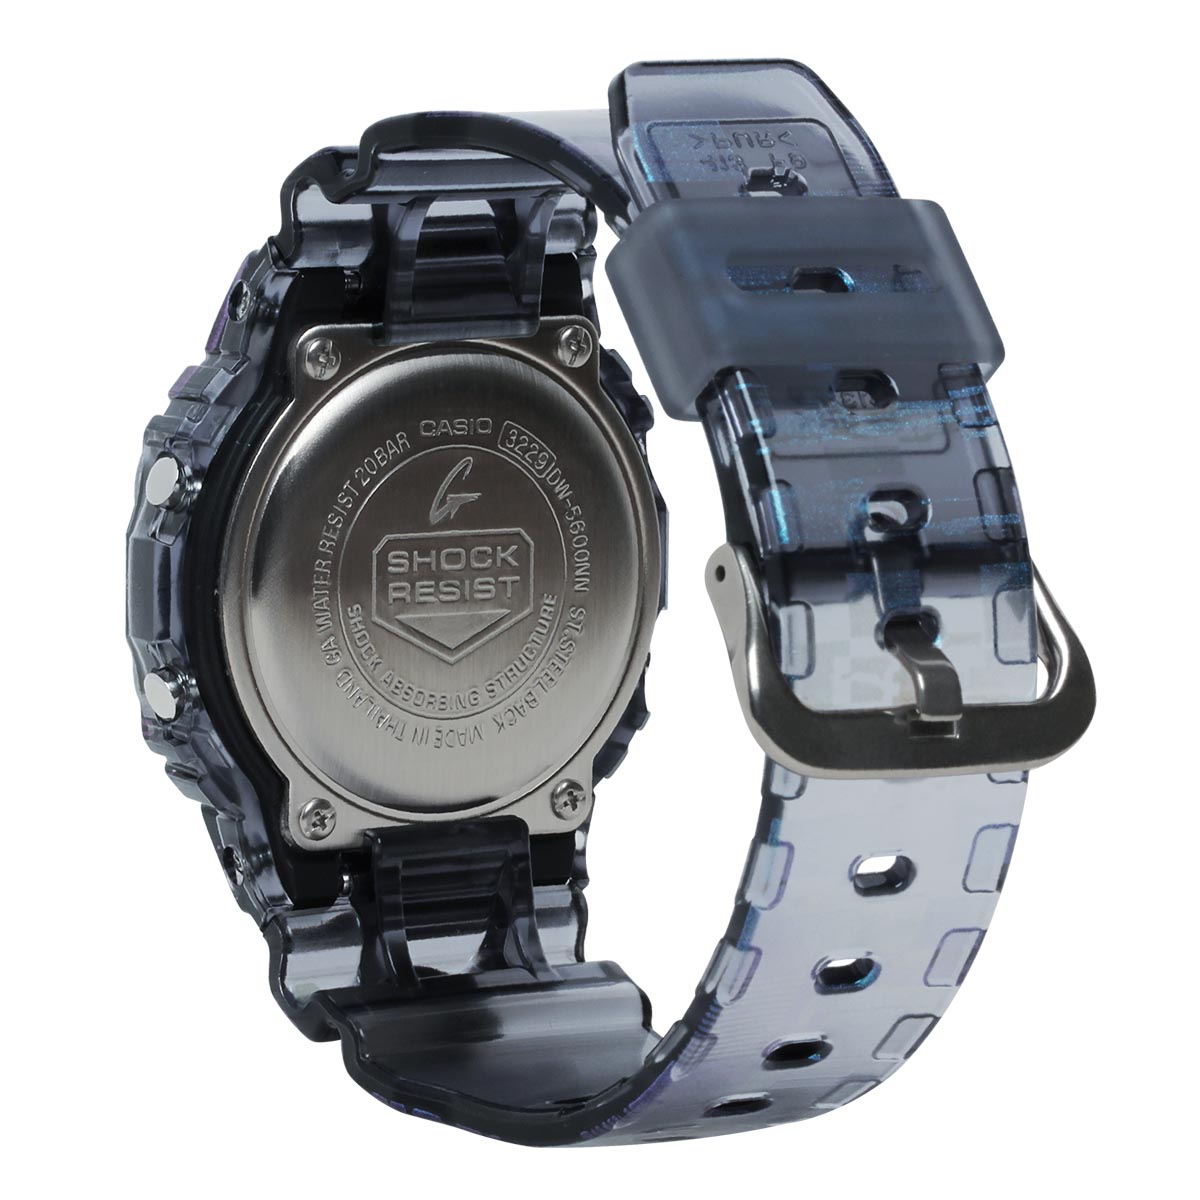 G Shock Mens Watch with Multi Colored Dial and Iridescent Translucent Strap (quartz movement)